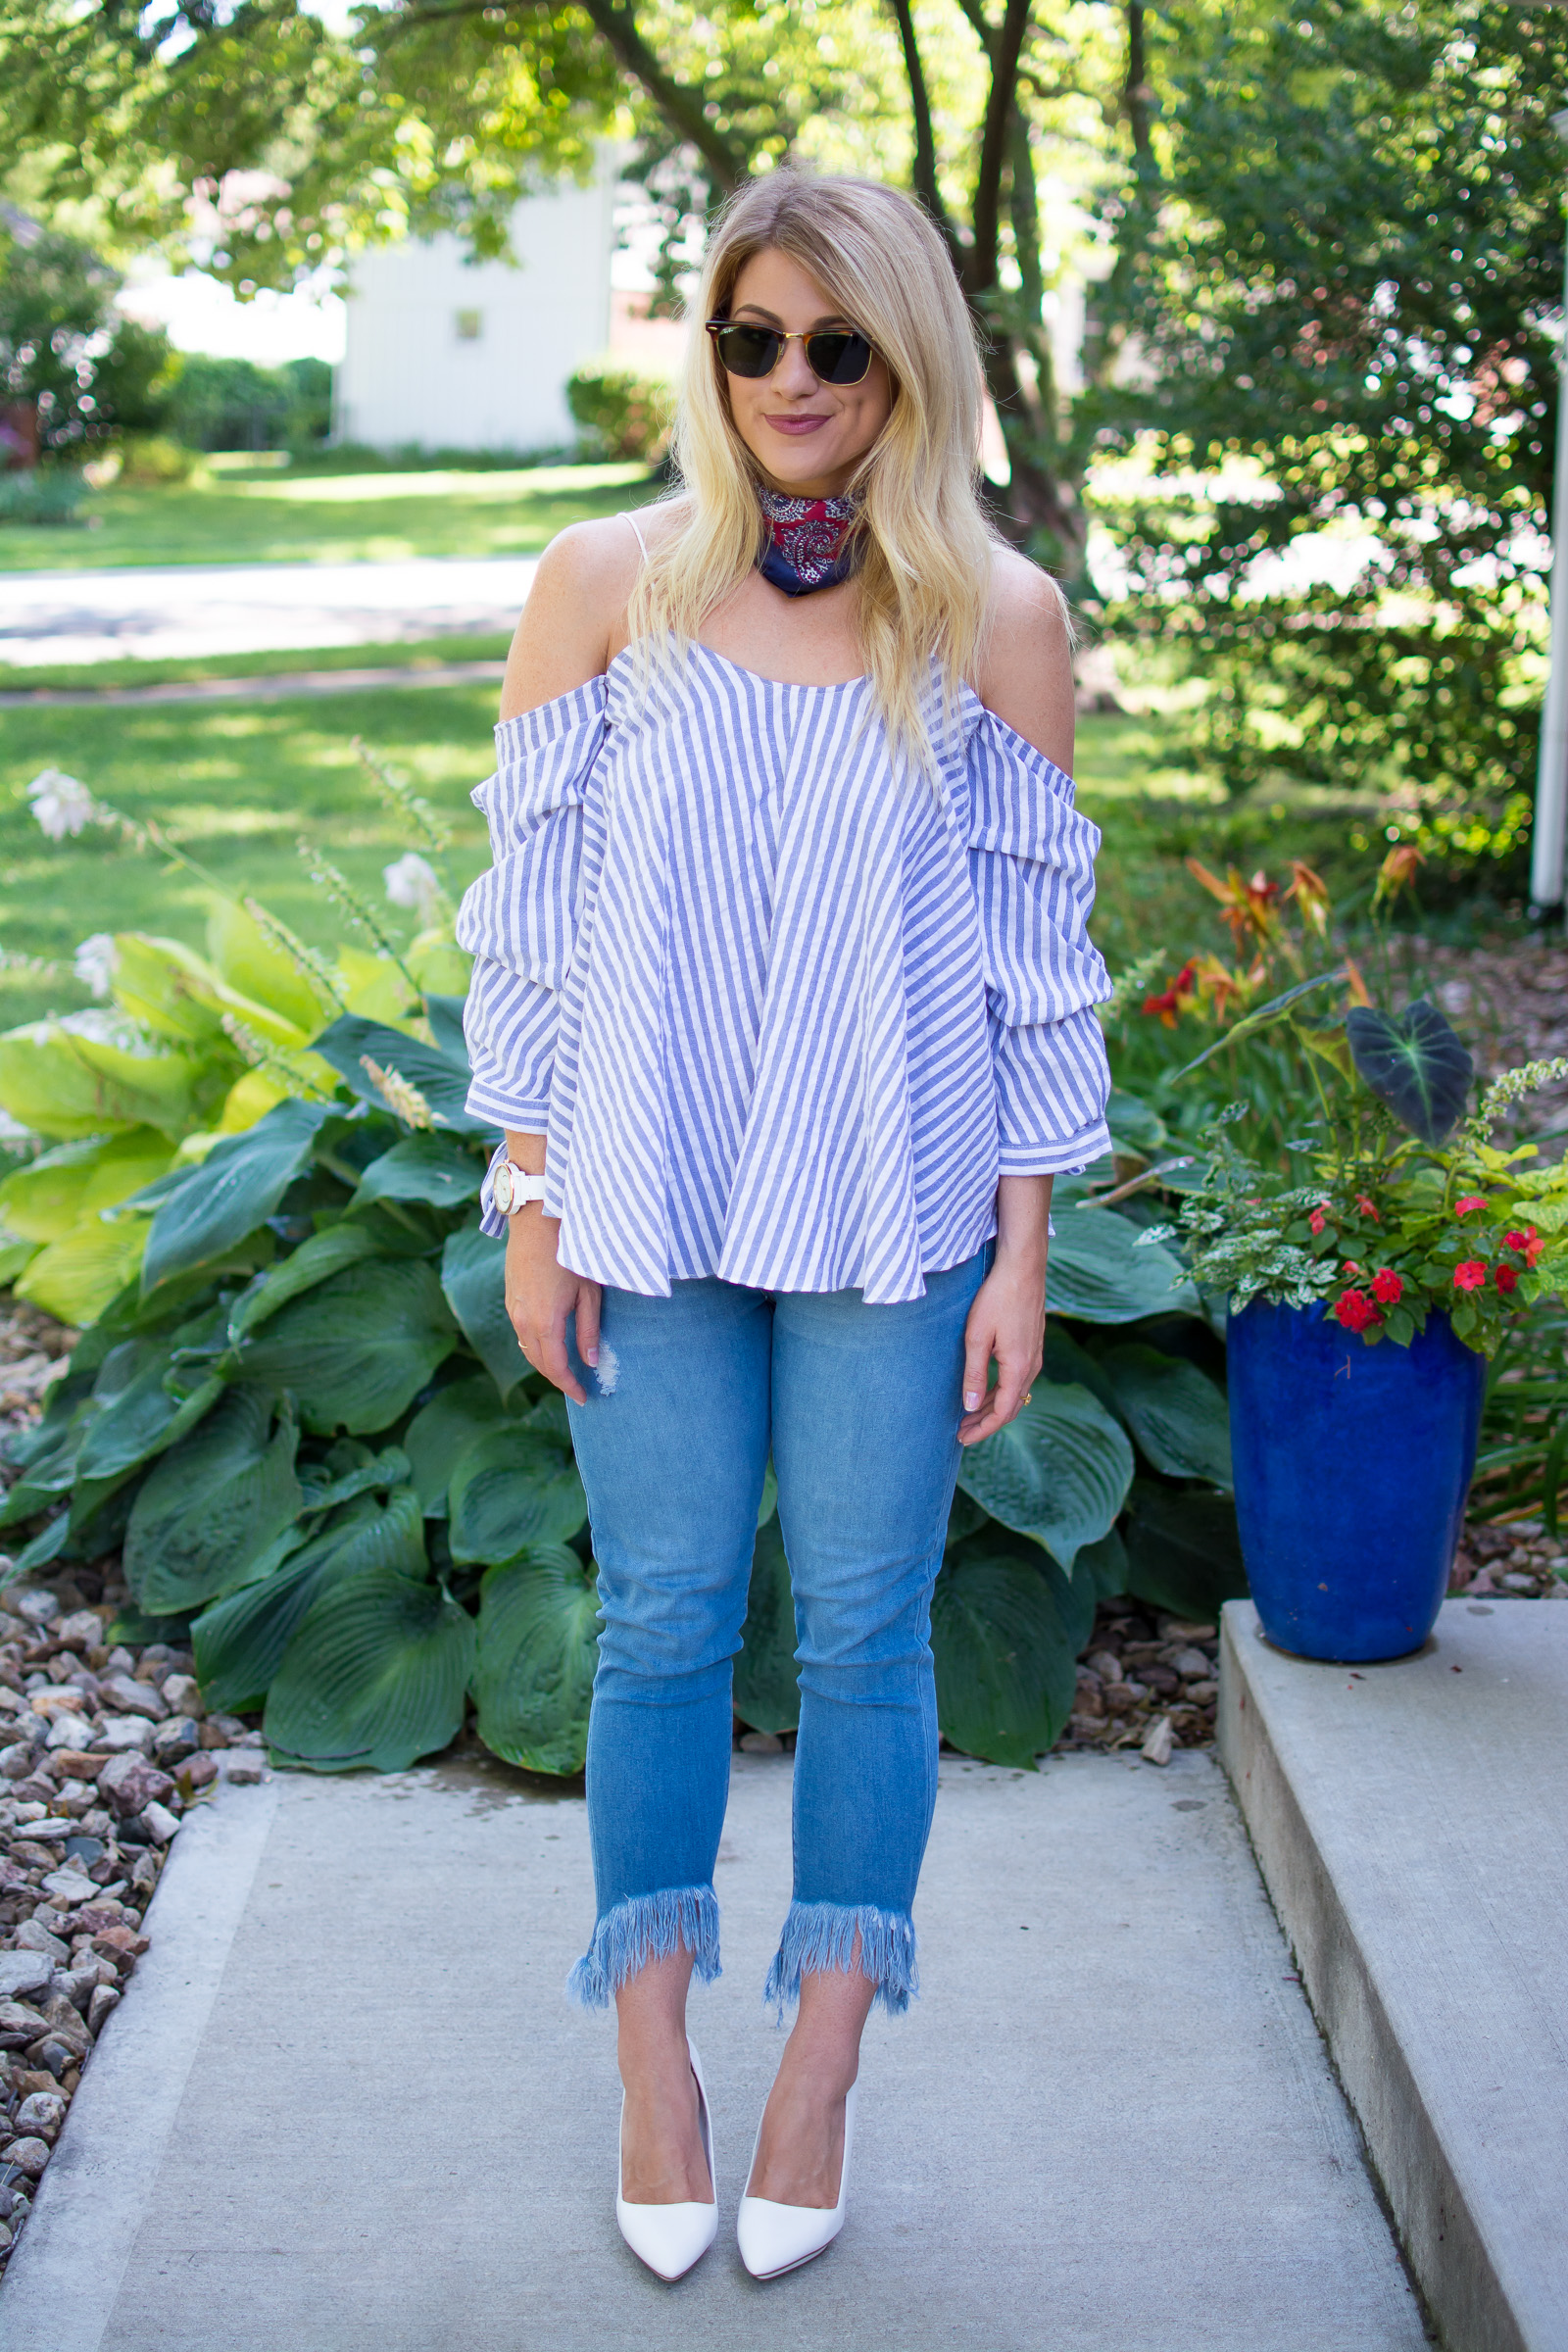 More Blue and White Stripes + Frayed Denim. | Le Stylo Rouge